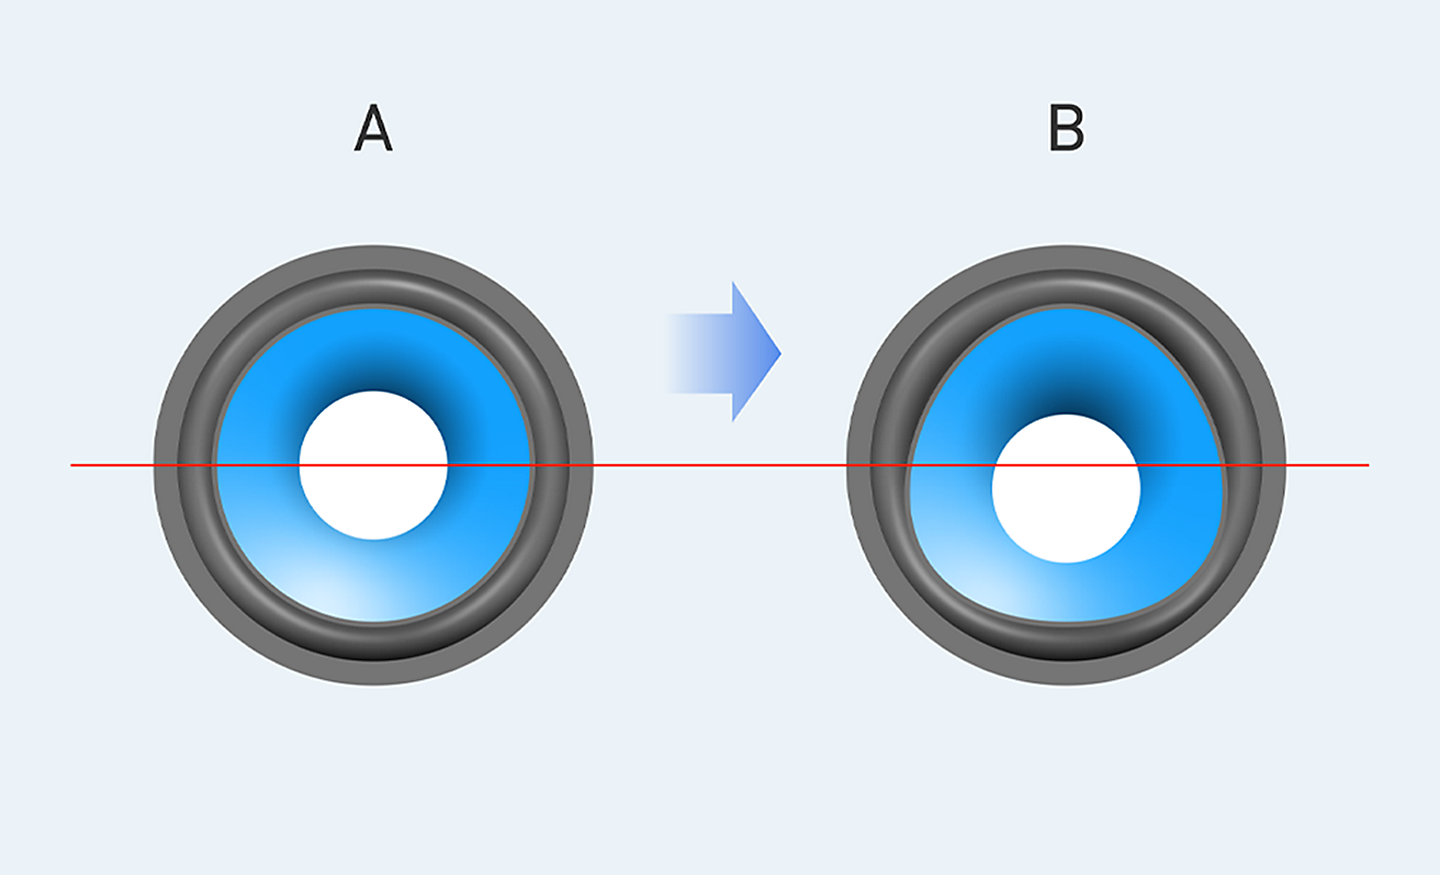 Image comparing the off-centre diaphragm to a regular design. The off-centre design is egg-shaped and the centre is lower